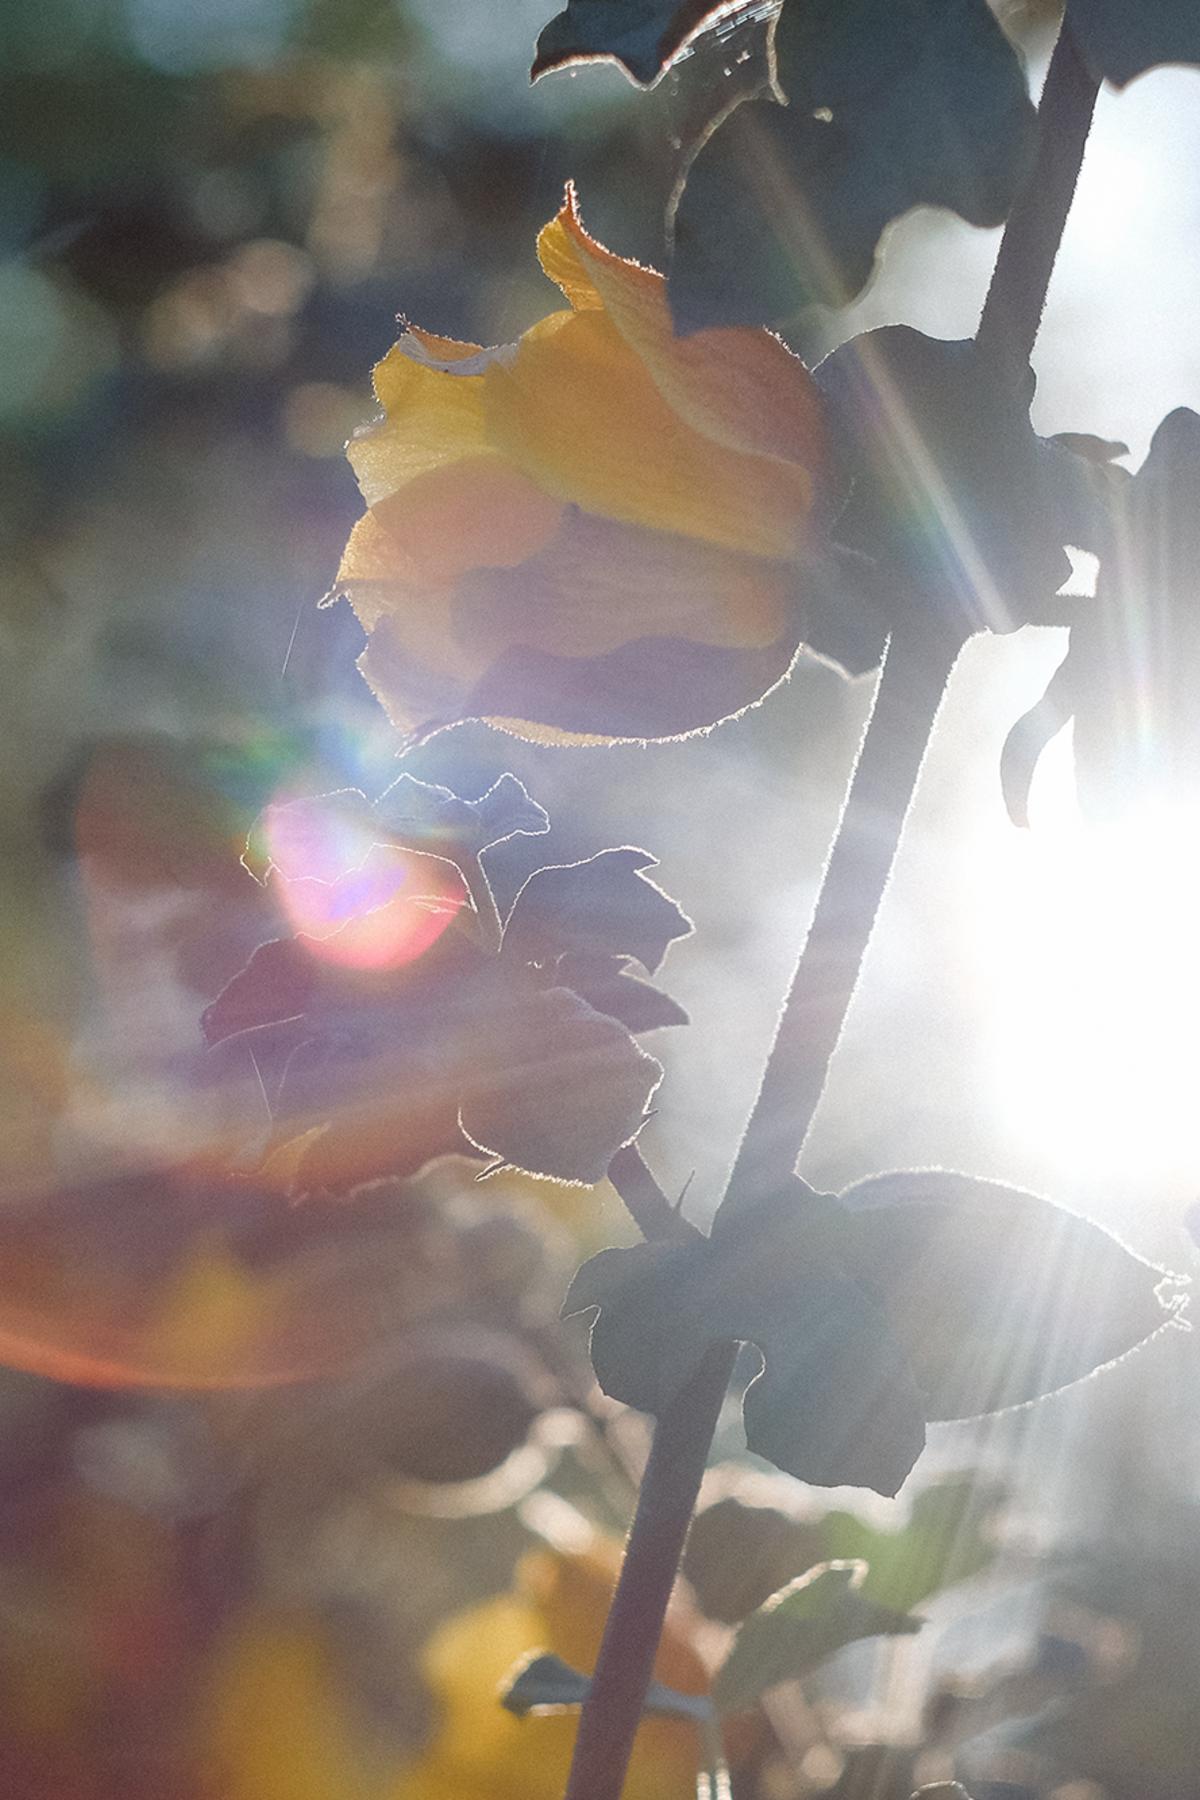 Light shining upon flower and leaves by Cyrus Crossan